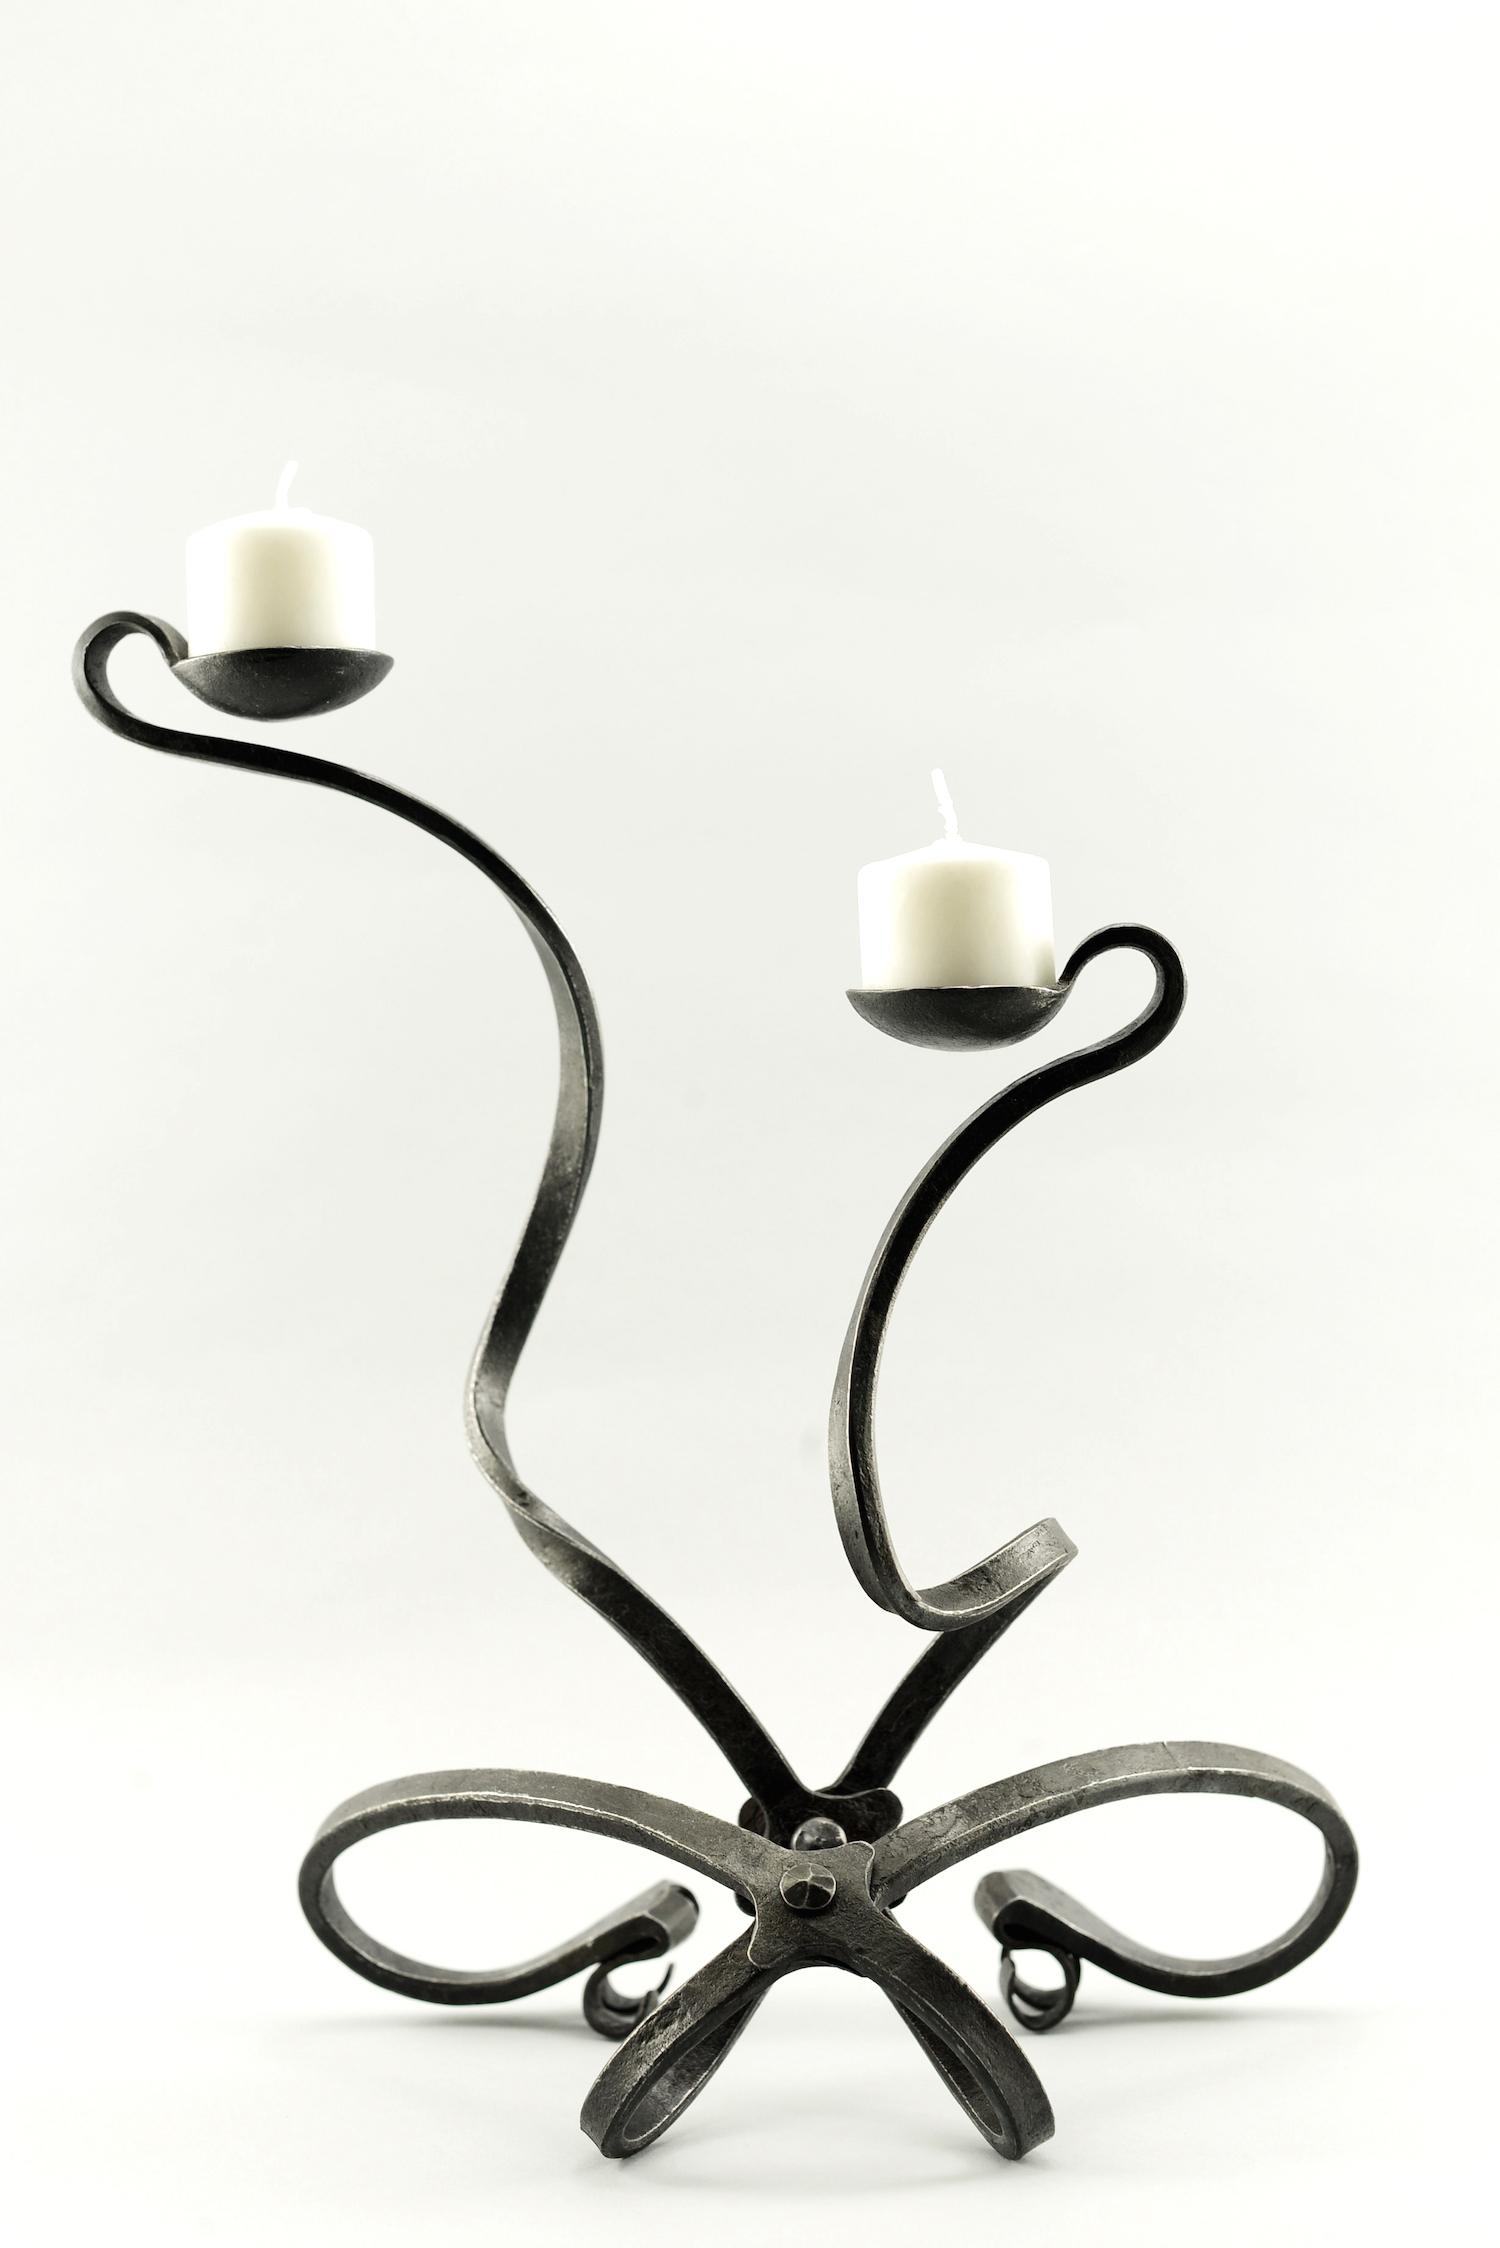  Squiggle Cups Candlestick, steel, 2016 